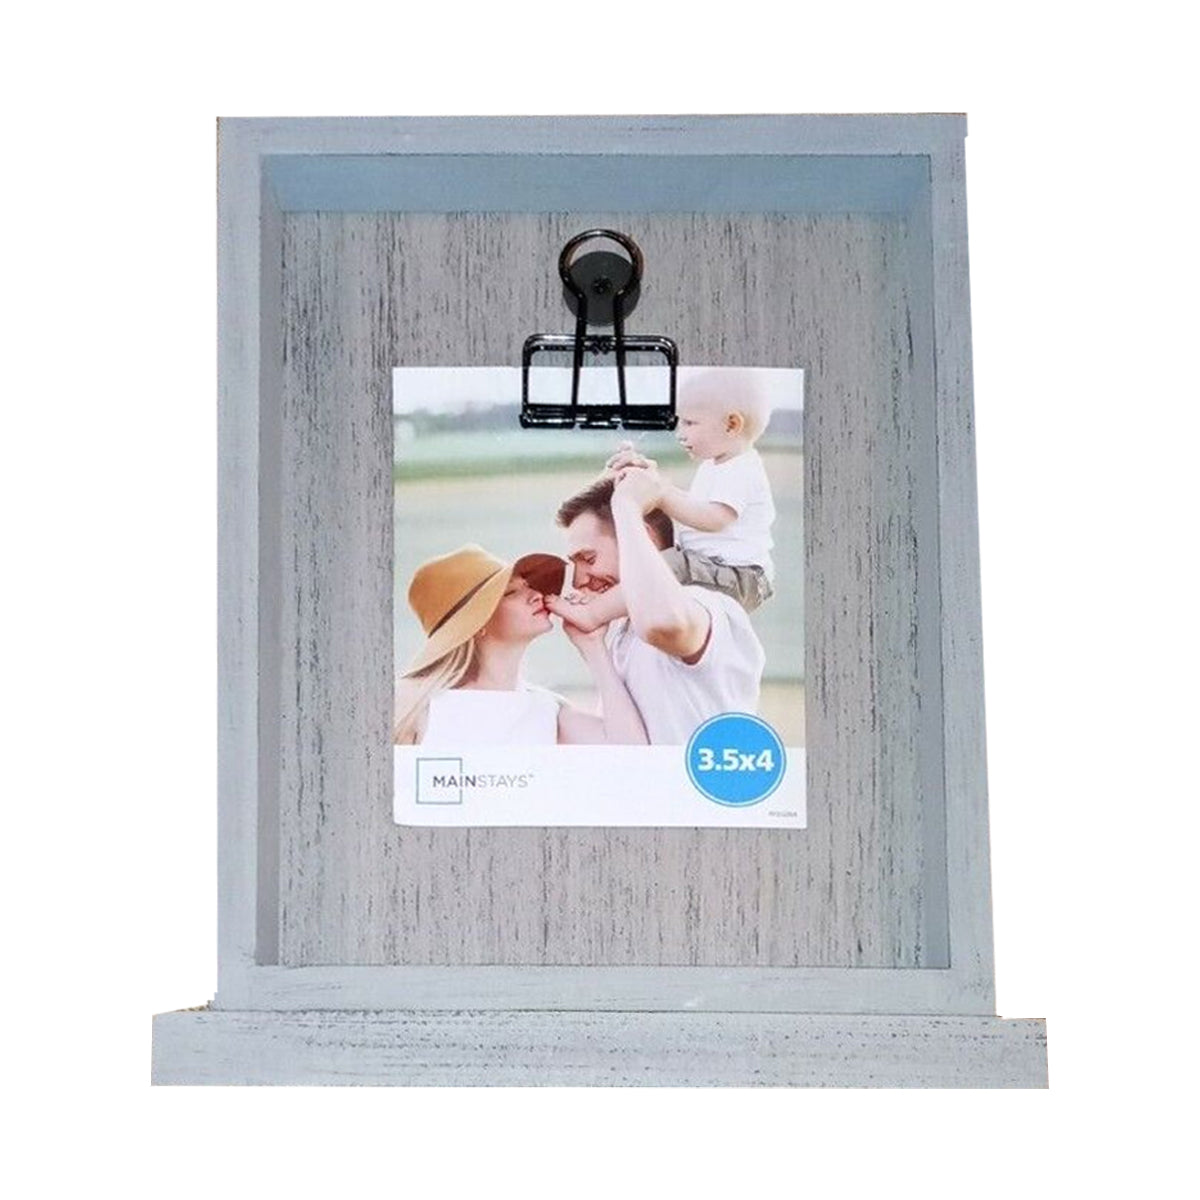 Standing Vertical Wooden Frame With Clip – Holds Photos, Cards